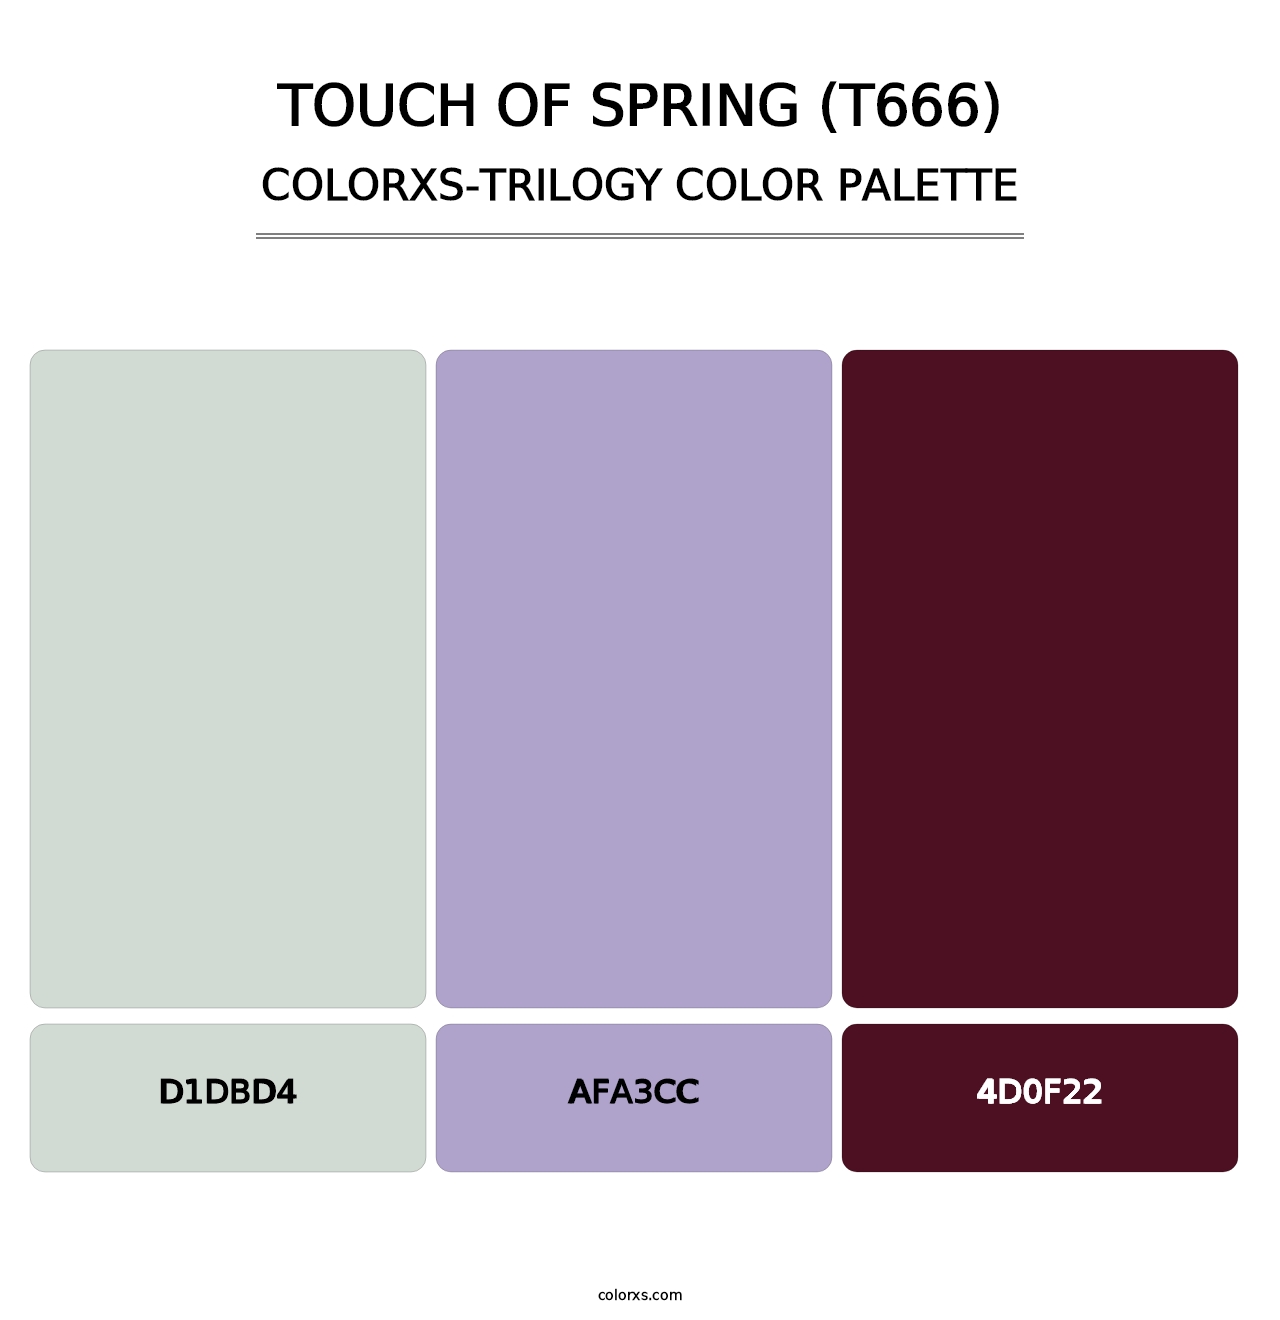 Touch of Spring (T666) - Colorxs Trilogy Palette